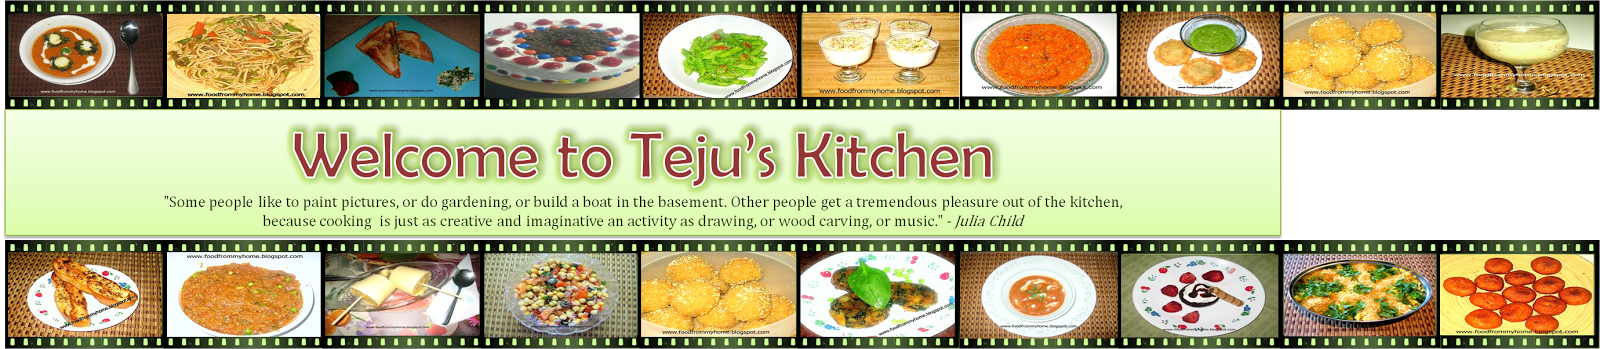 Welcome to Teju's Kitchen